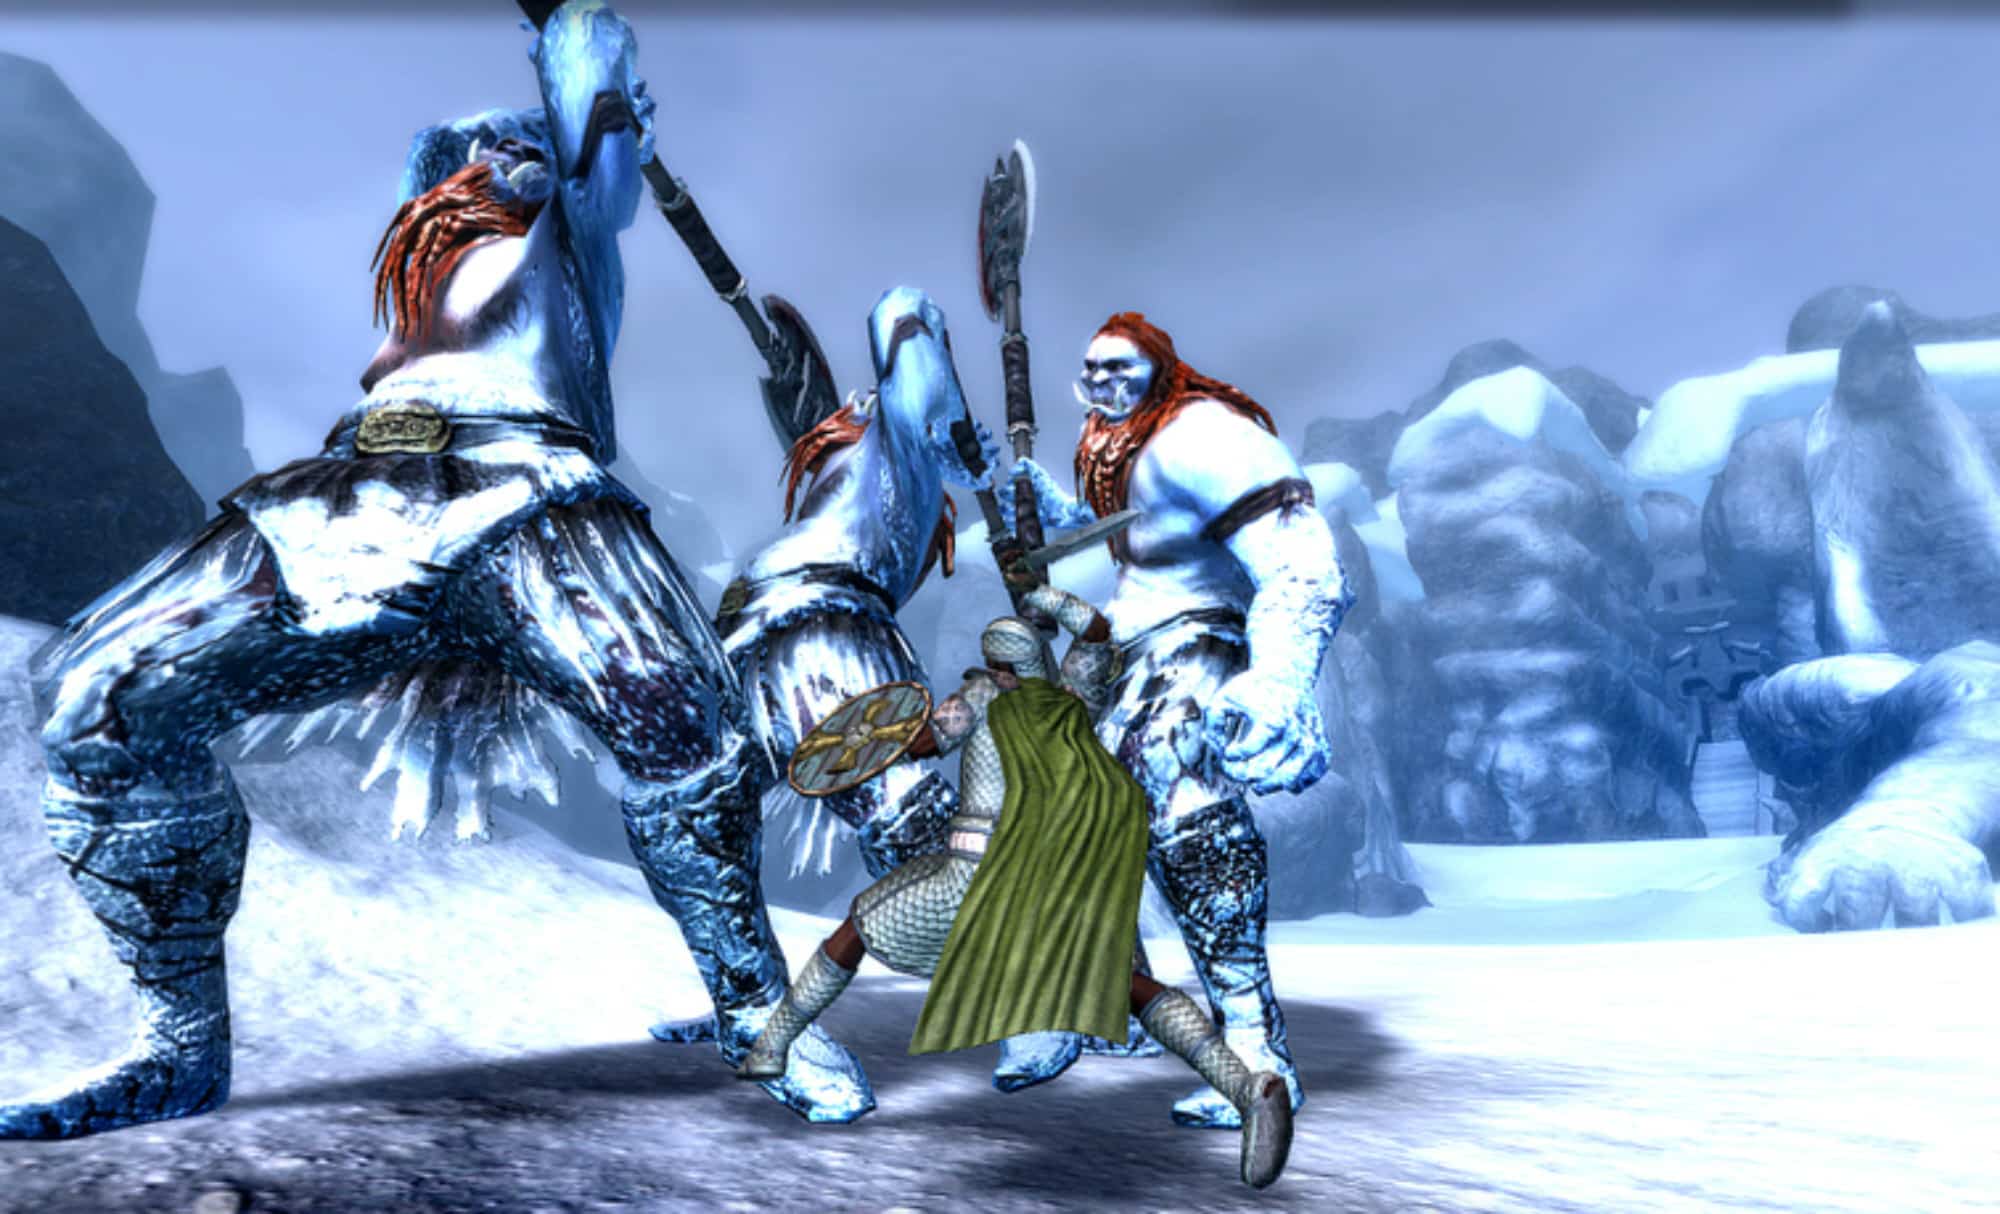 Age of Conan MMORPG goes Free-to-play just in time for film - 2000 x 1214 jpeg 1030kB